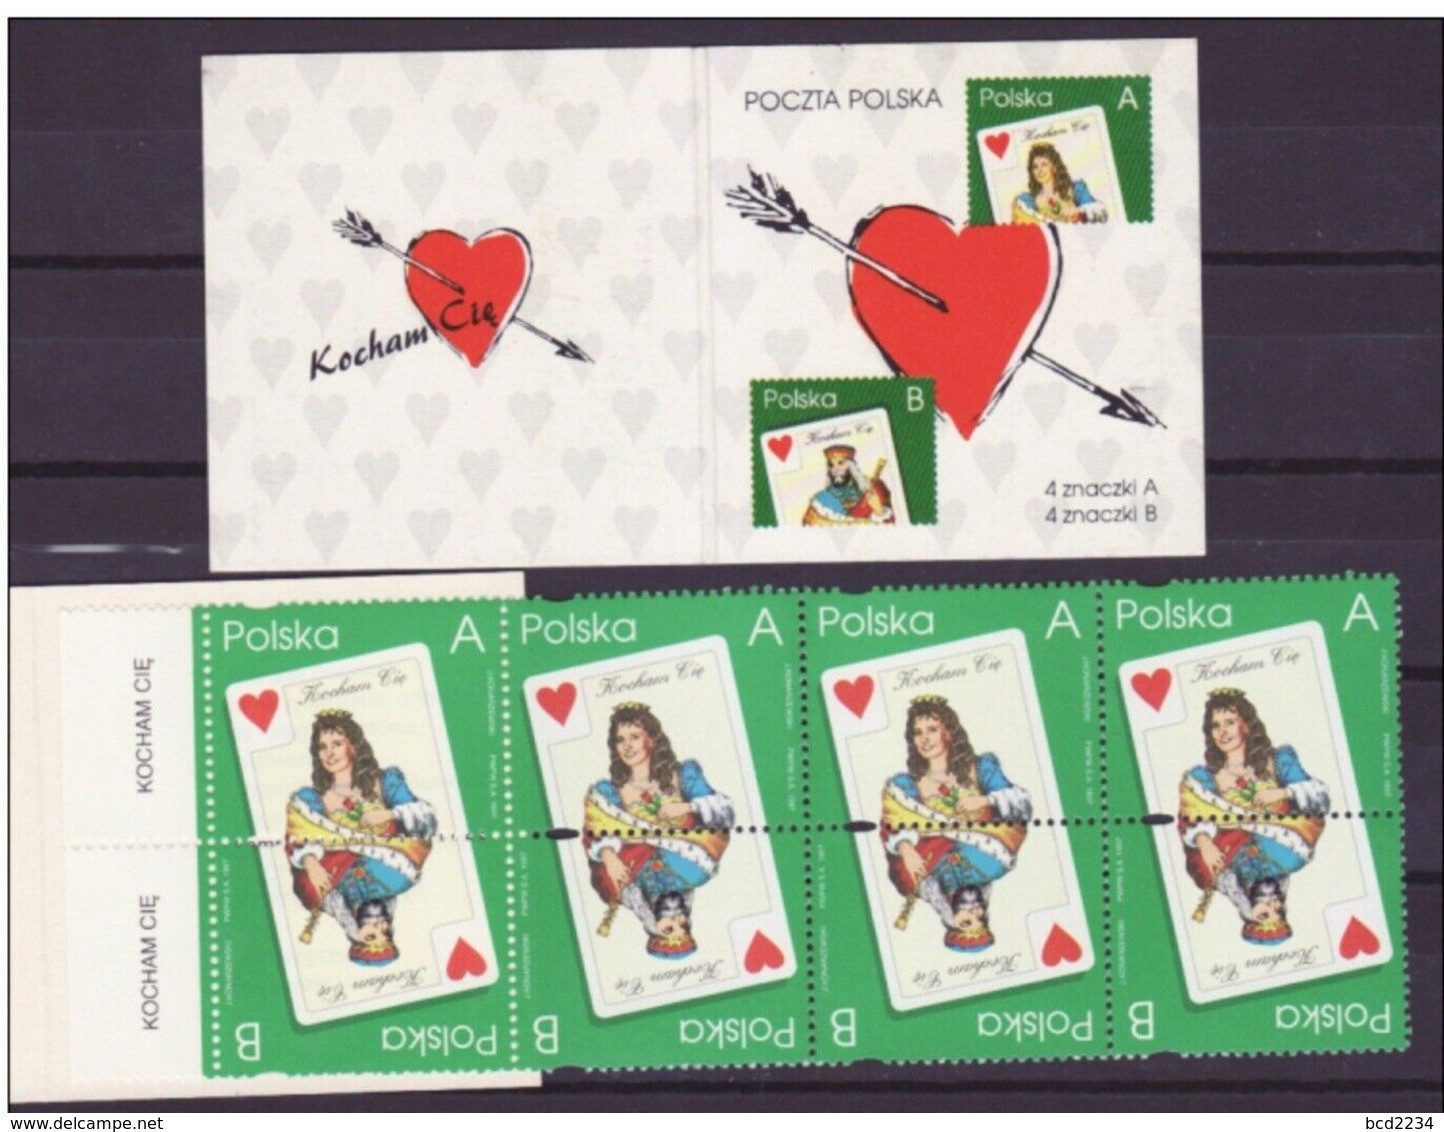 POLAND 1997 KOCHAM CIE I LOVE YOU BOOKLET COMPLETE VALENTINES DAY Mi No 3634-35 MNH Fi 10 Heart Cupid Playing Card Queen - Booklets